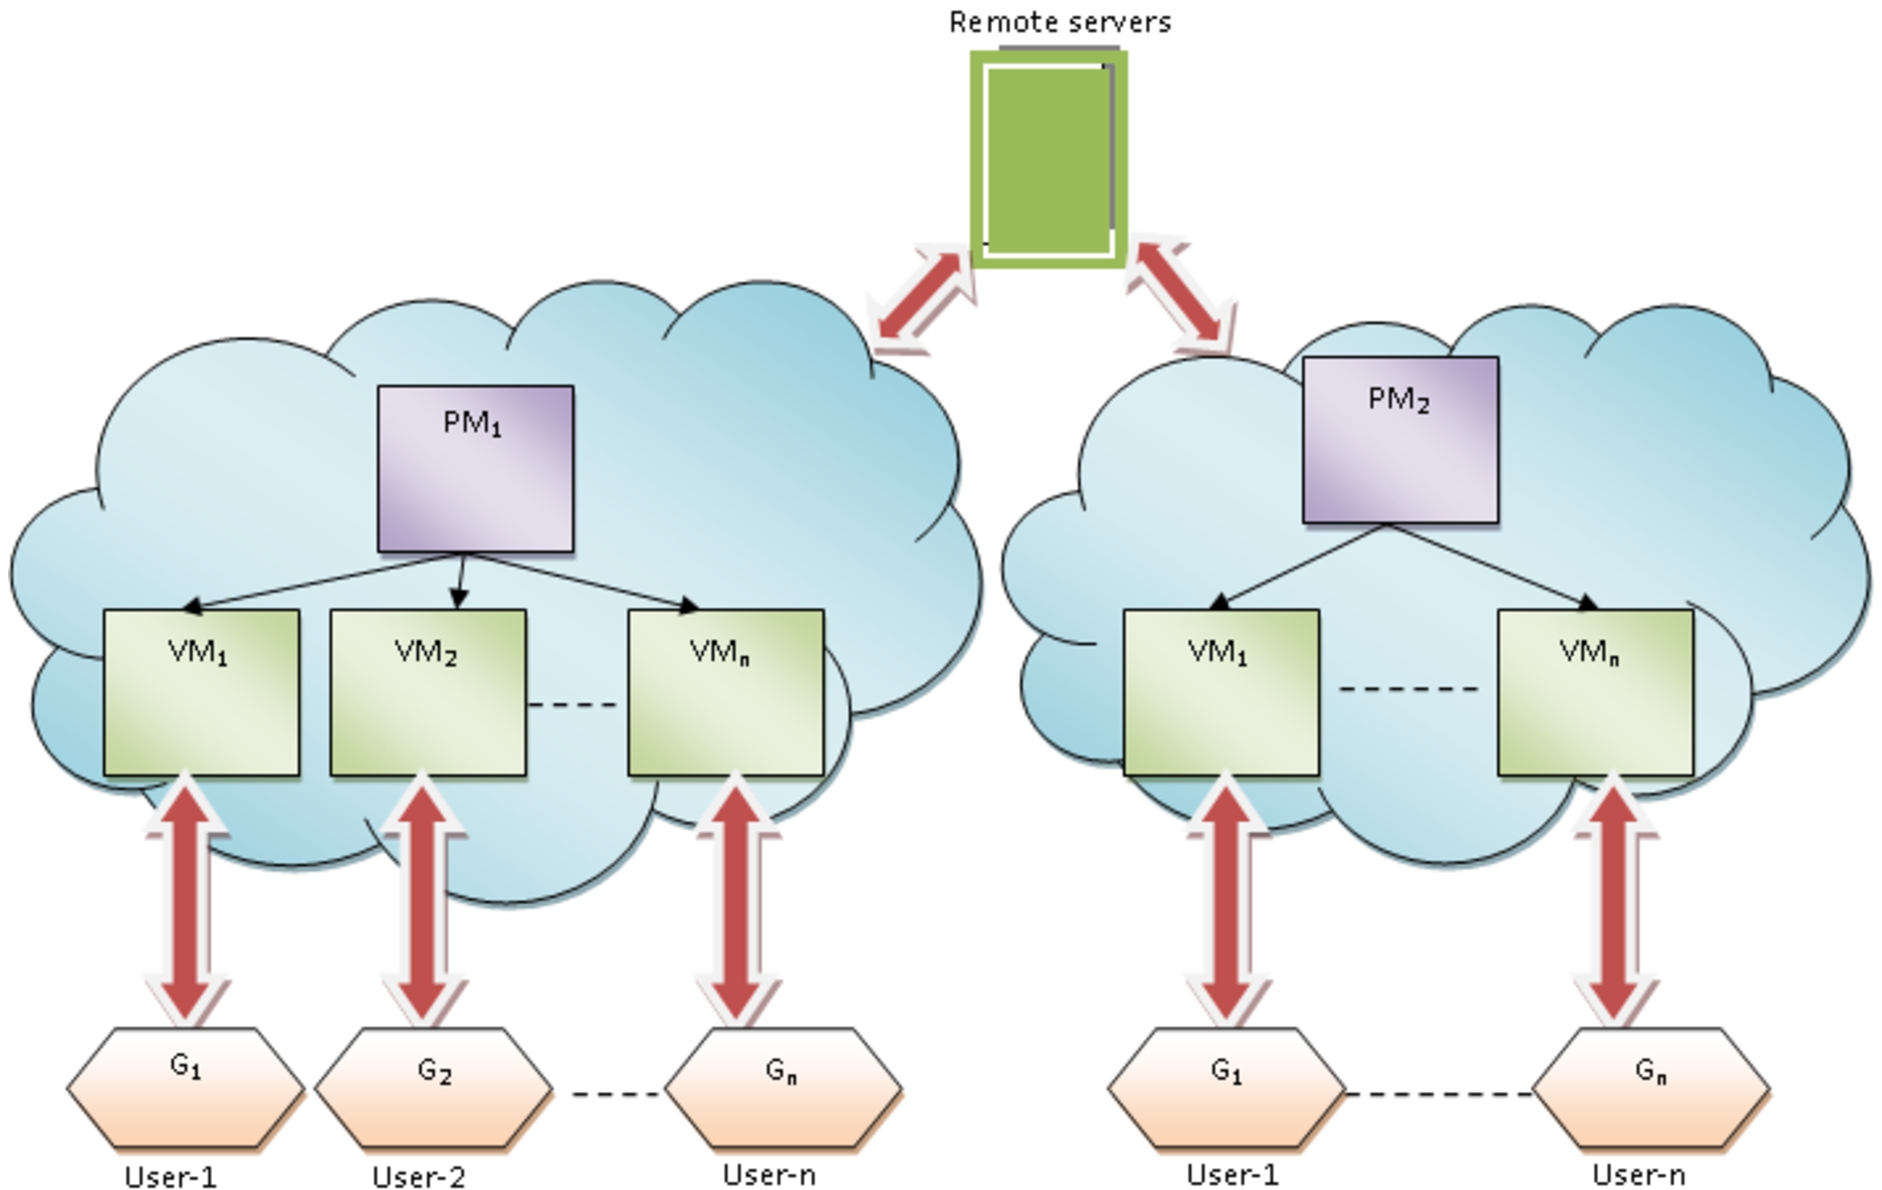 The system model of cloud infrastructure.